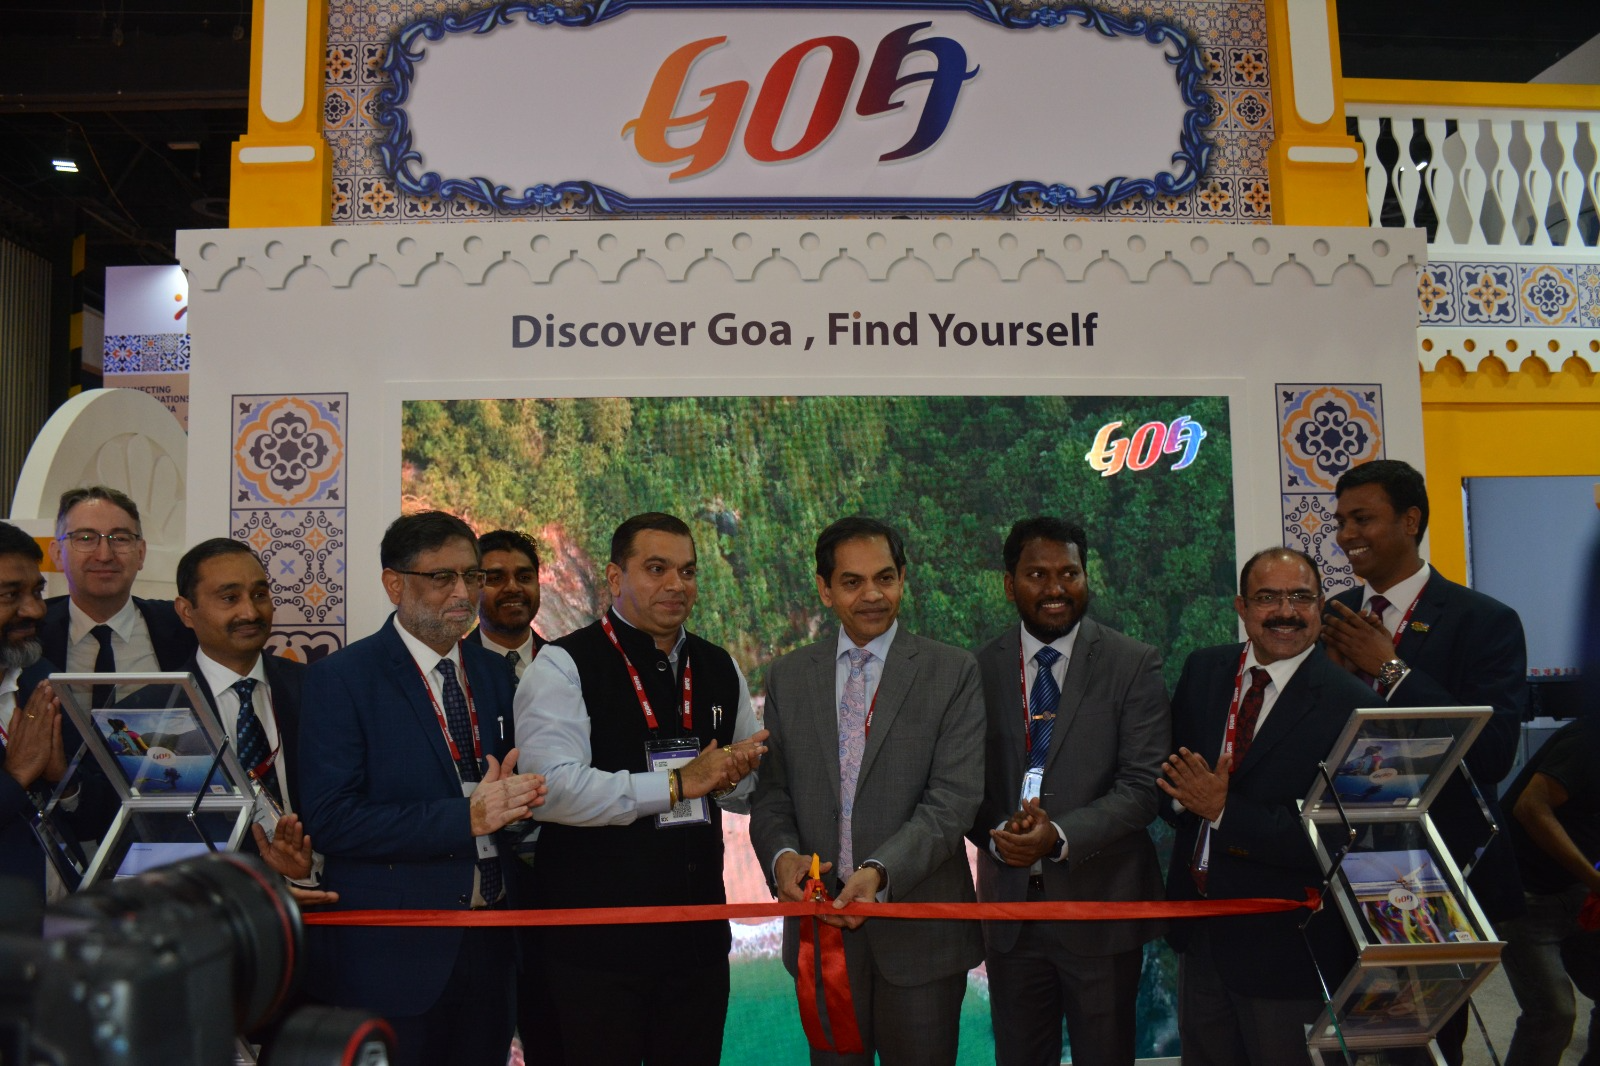 Goa Tourism held a series of successful B2B meetings on the first day at ATM Dubai